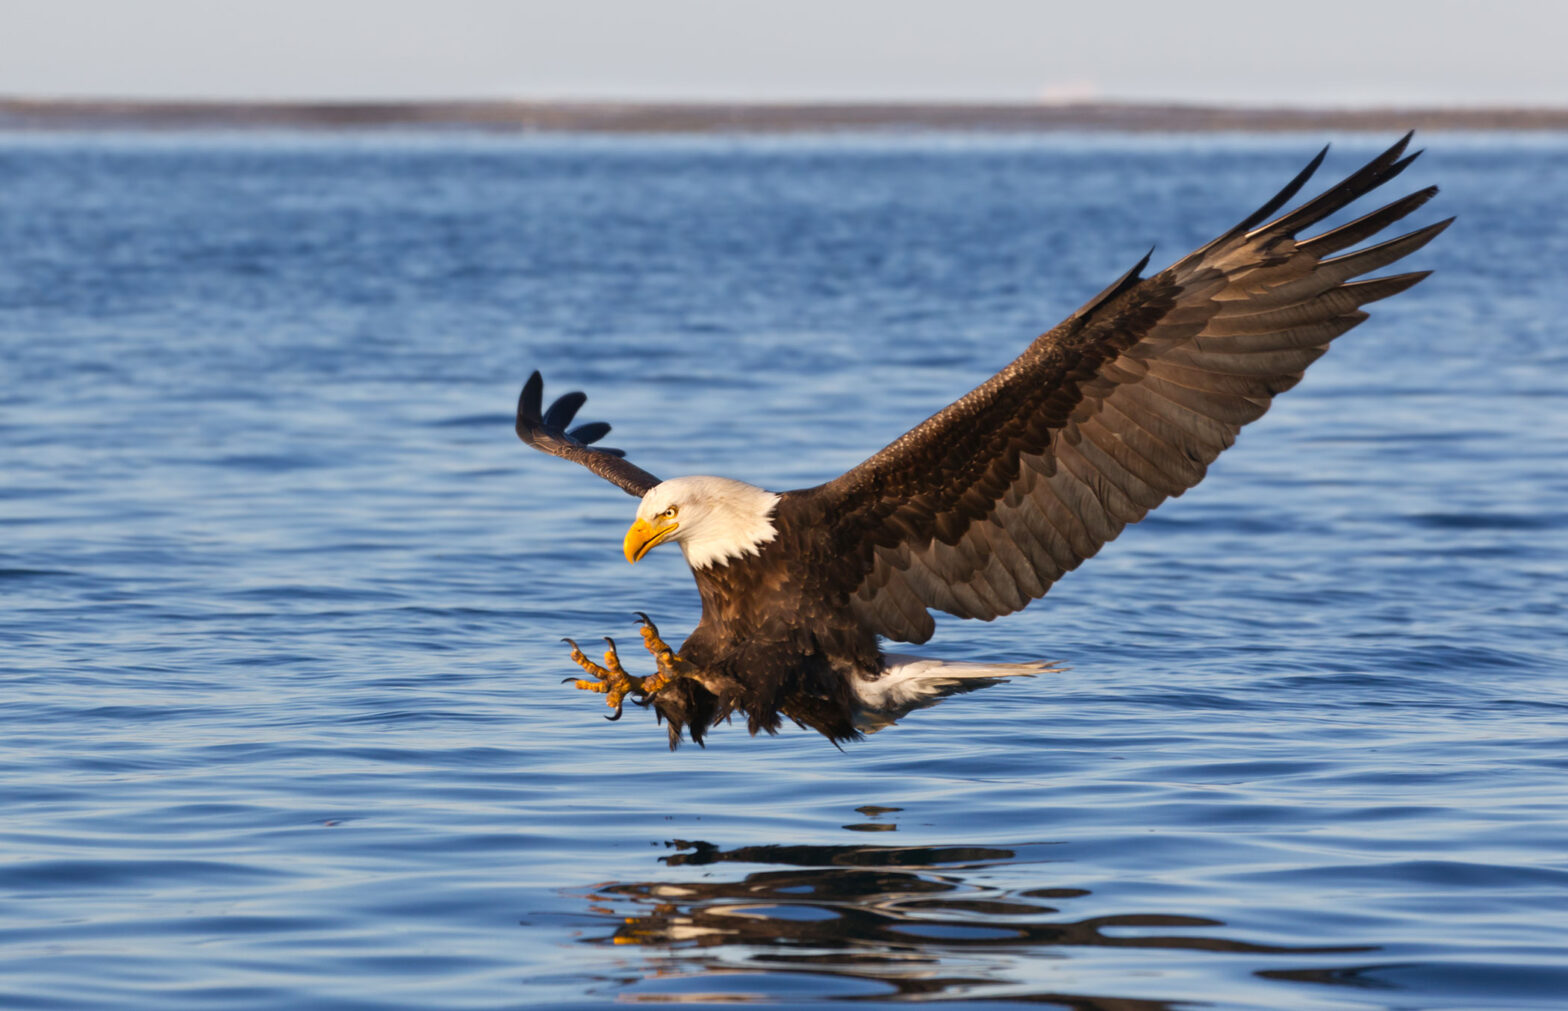 Bald Eagle hunting over water.